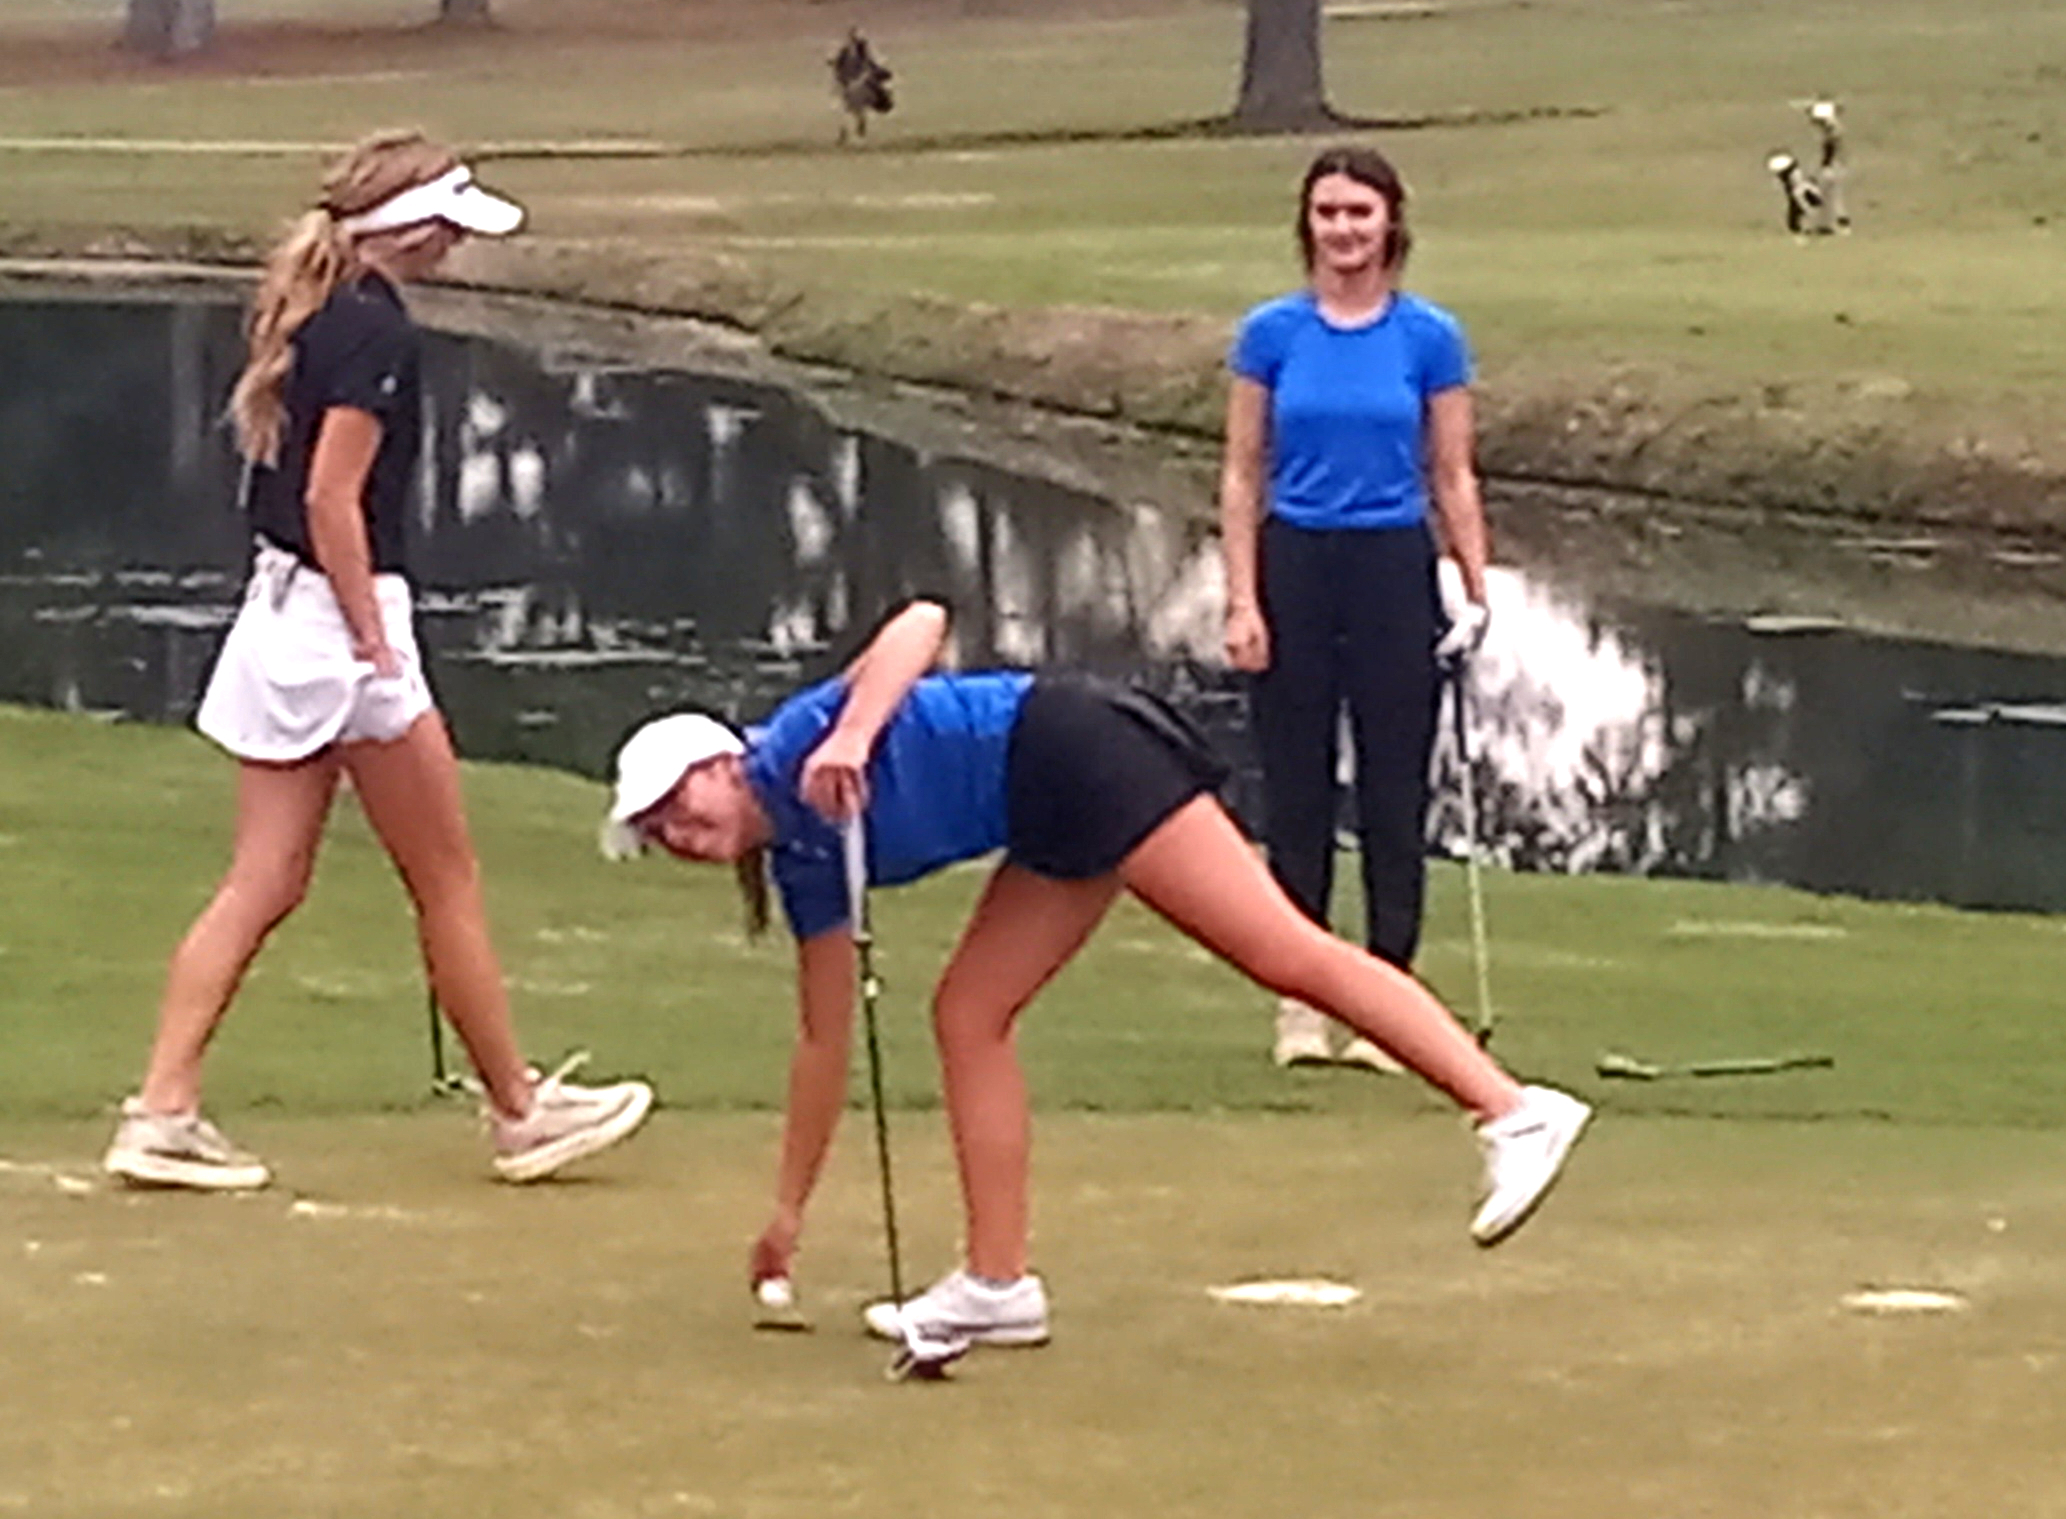 White Plains’ Isabel Rodgers smiles after hitting a putt during the Calhoun County tournament at Pine Hill Country Club. She won the county tournament and tied for low medalist at sectional. She also tied Alexandria’s Marlee Hedgepeth for the best score (81) among Calhoun County players at their Class 4A-5A sub-state tournament. Alexandria qualified for state as a team. Rogers is East Alabama Sports Today’s All-Calhoun County player of the year for girls’ golf. (Photo by Joe Medley)